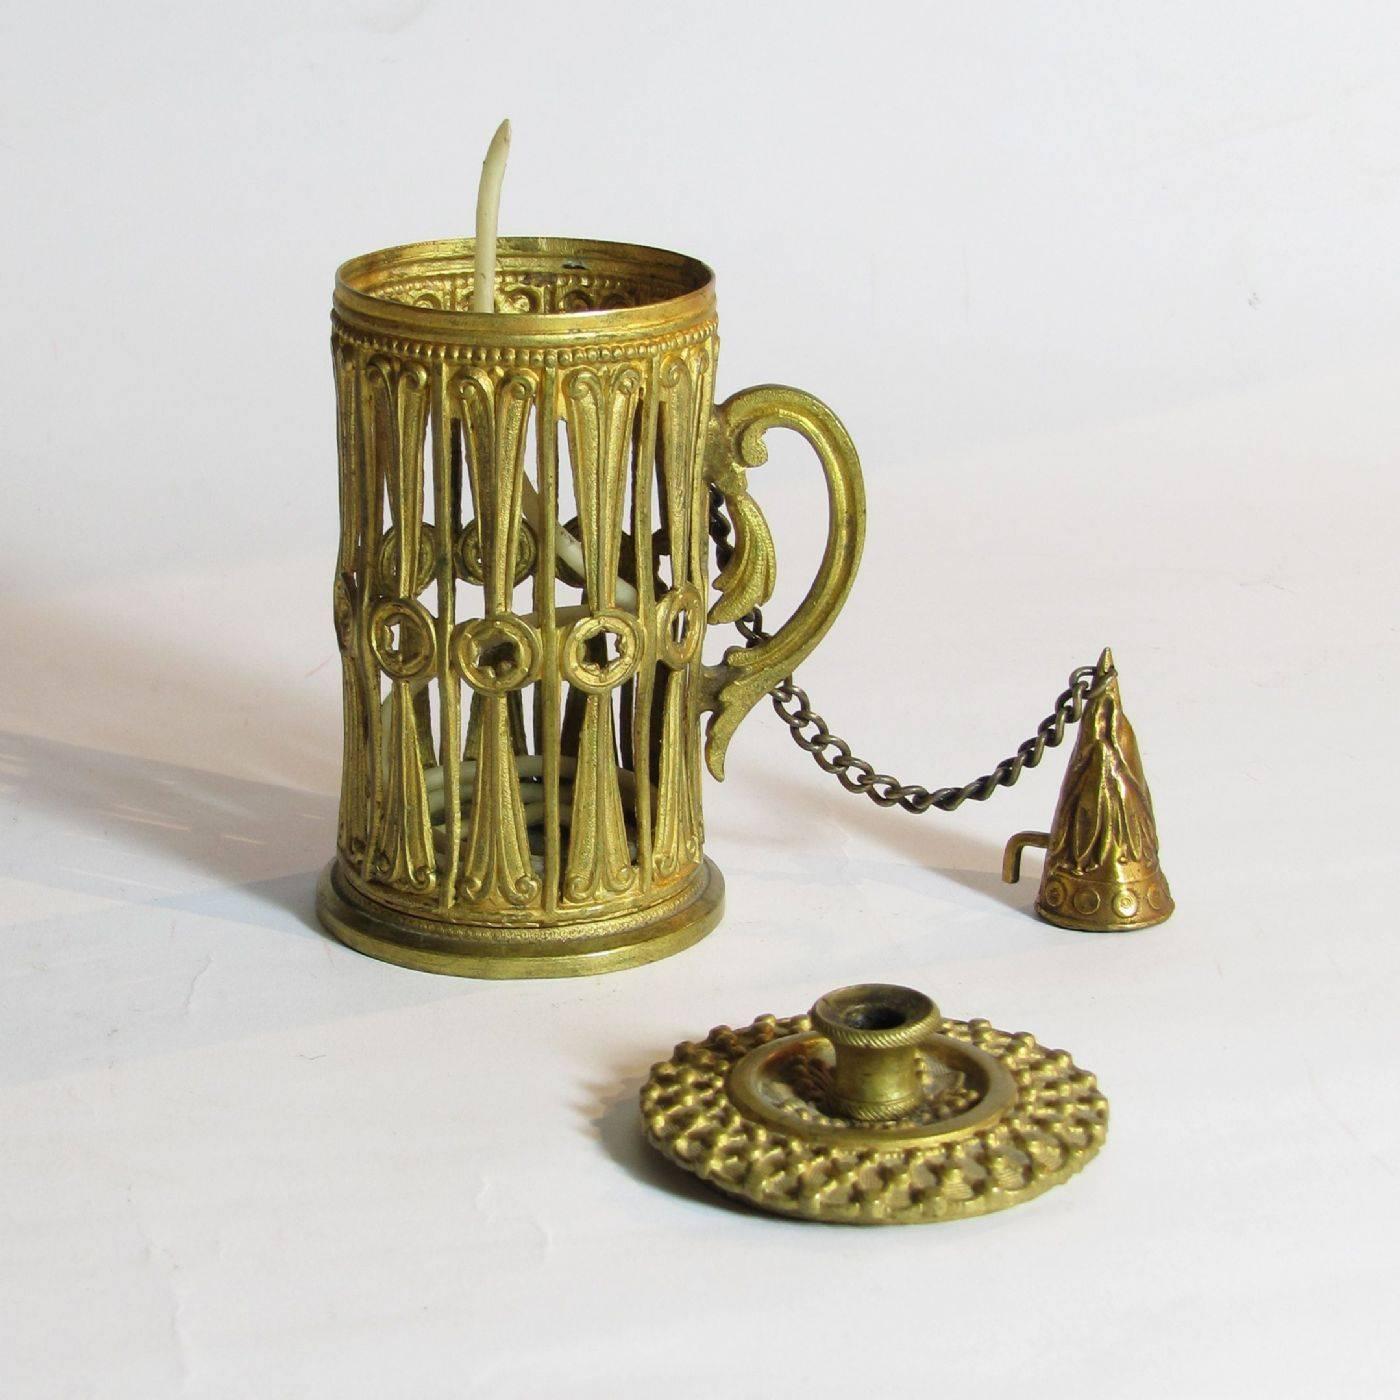 European 19th Century Wax Jack or Wax Tape Holder in Gilt Bronze with Antique Wick For Sale